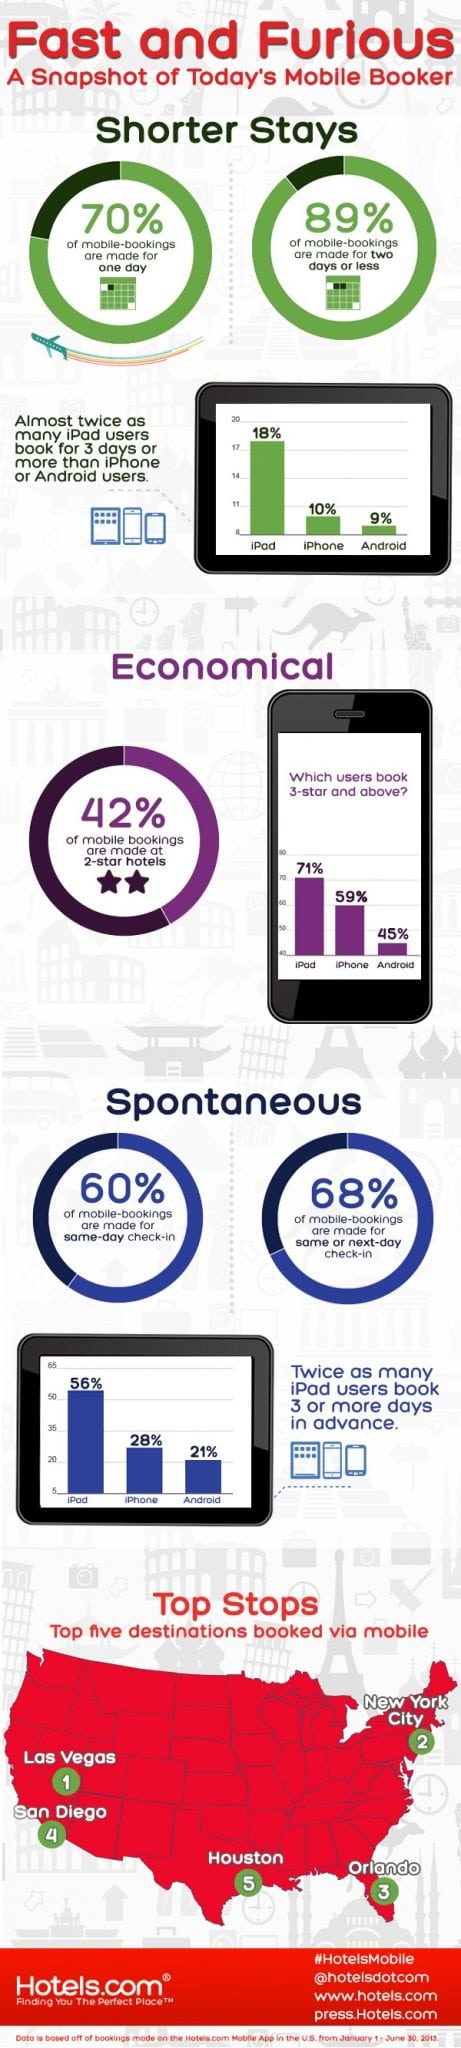 Mobile Infographic_FINAL